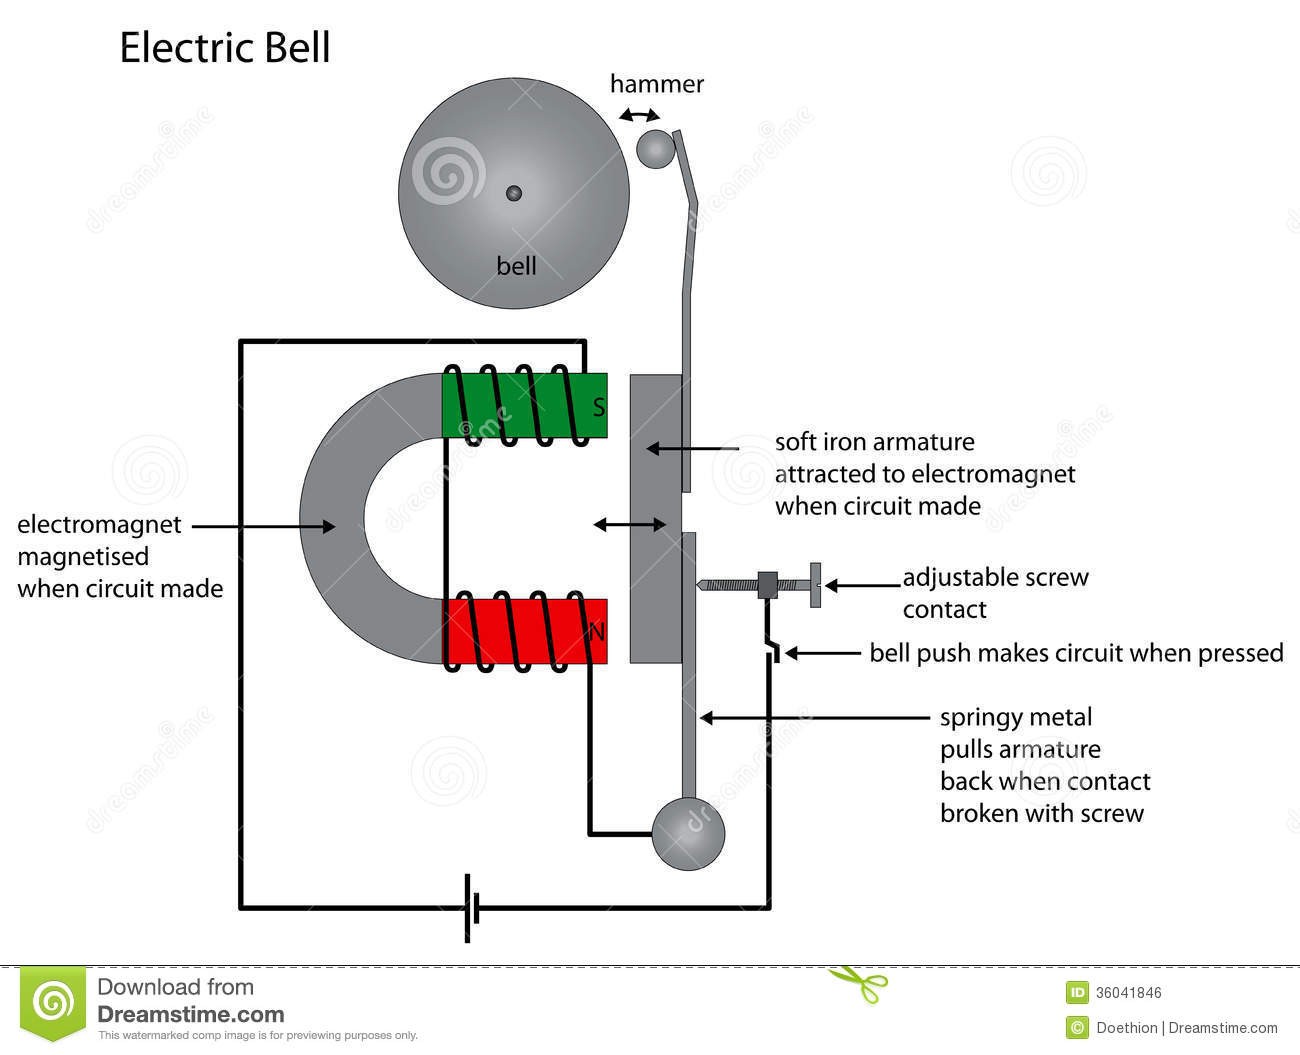 royalty free stock image electric bell diagram showing electromagnet use illustration image